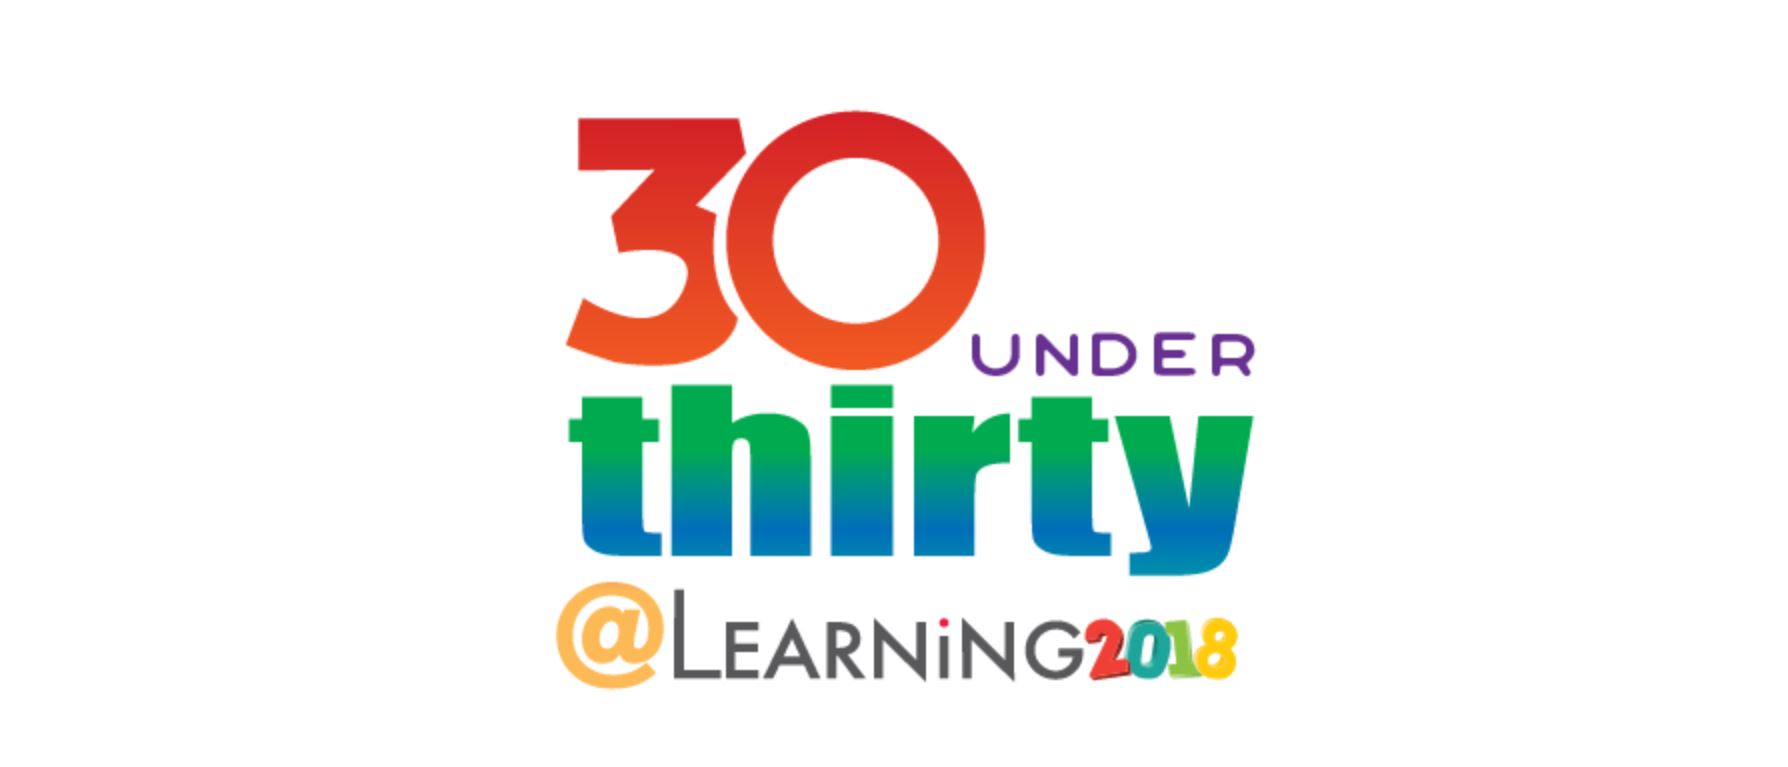 30 under 30 Learning 2018